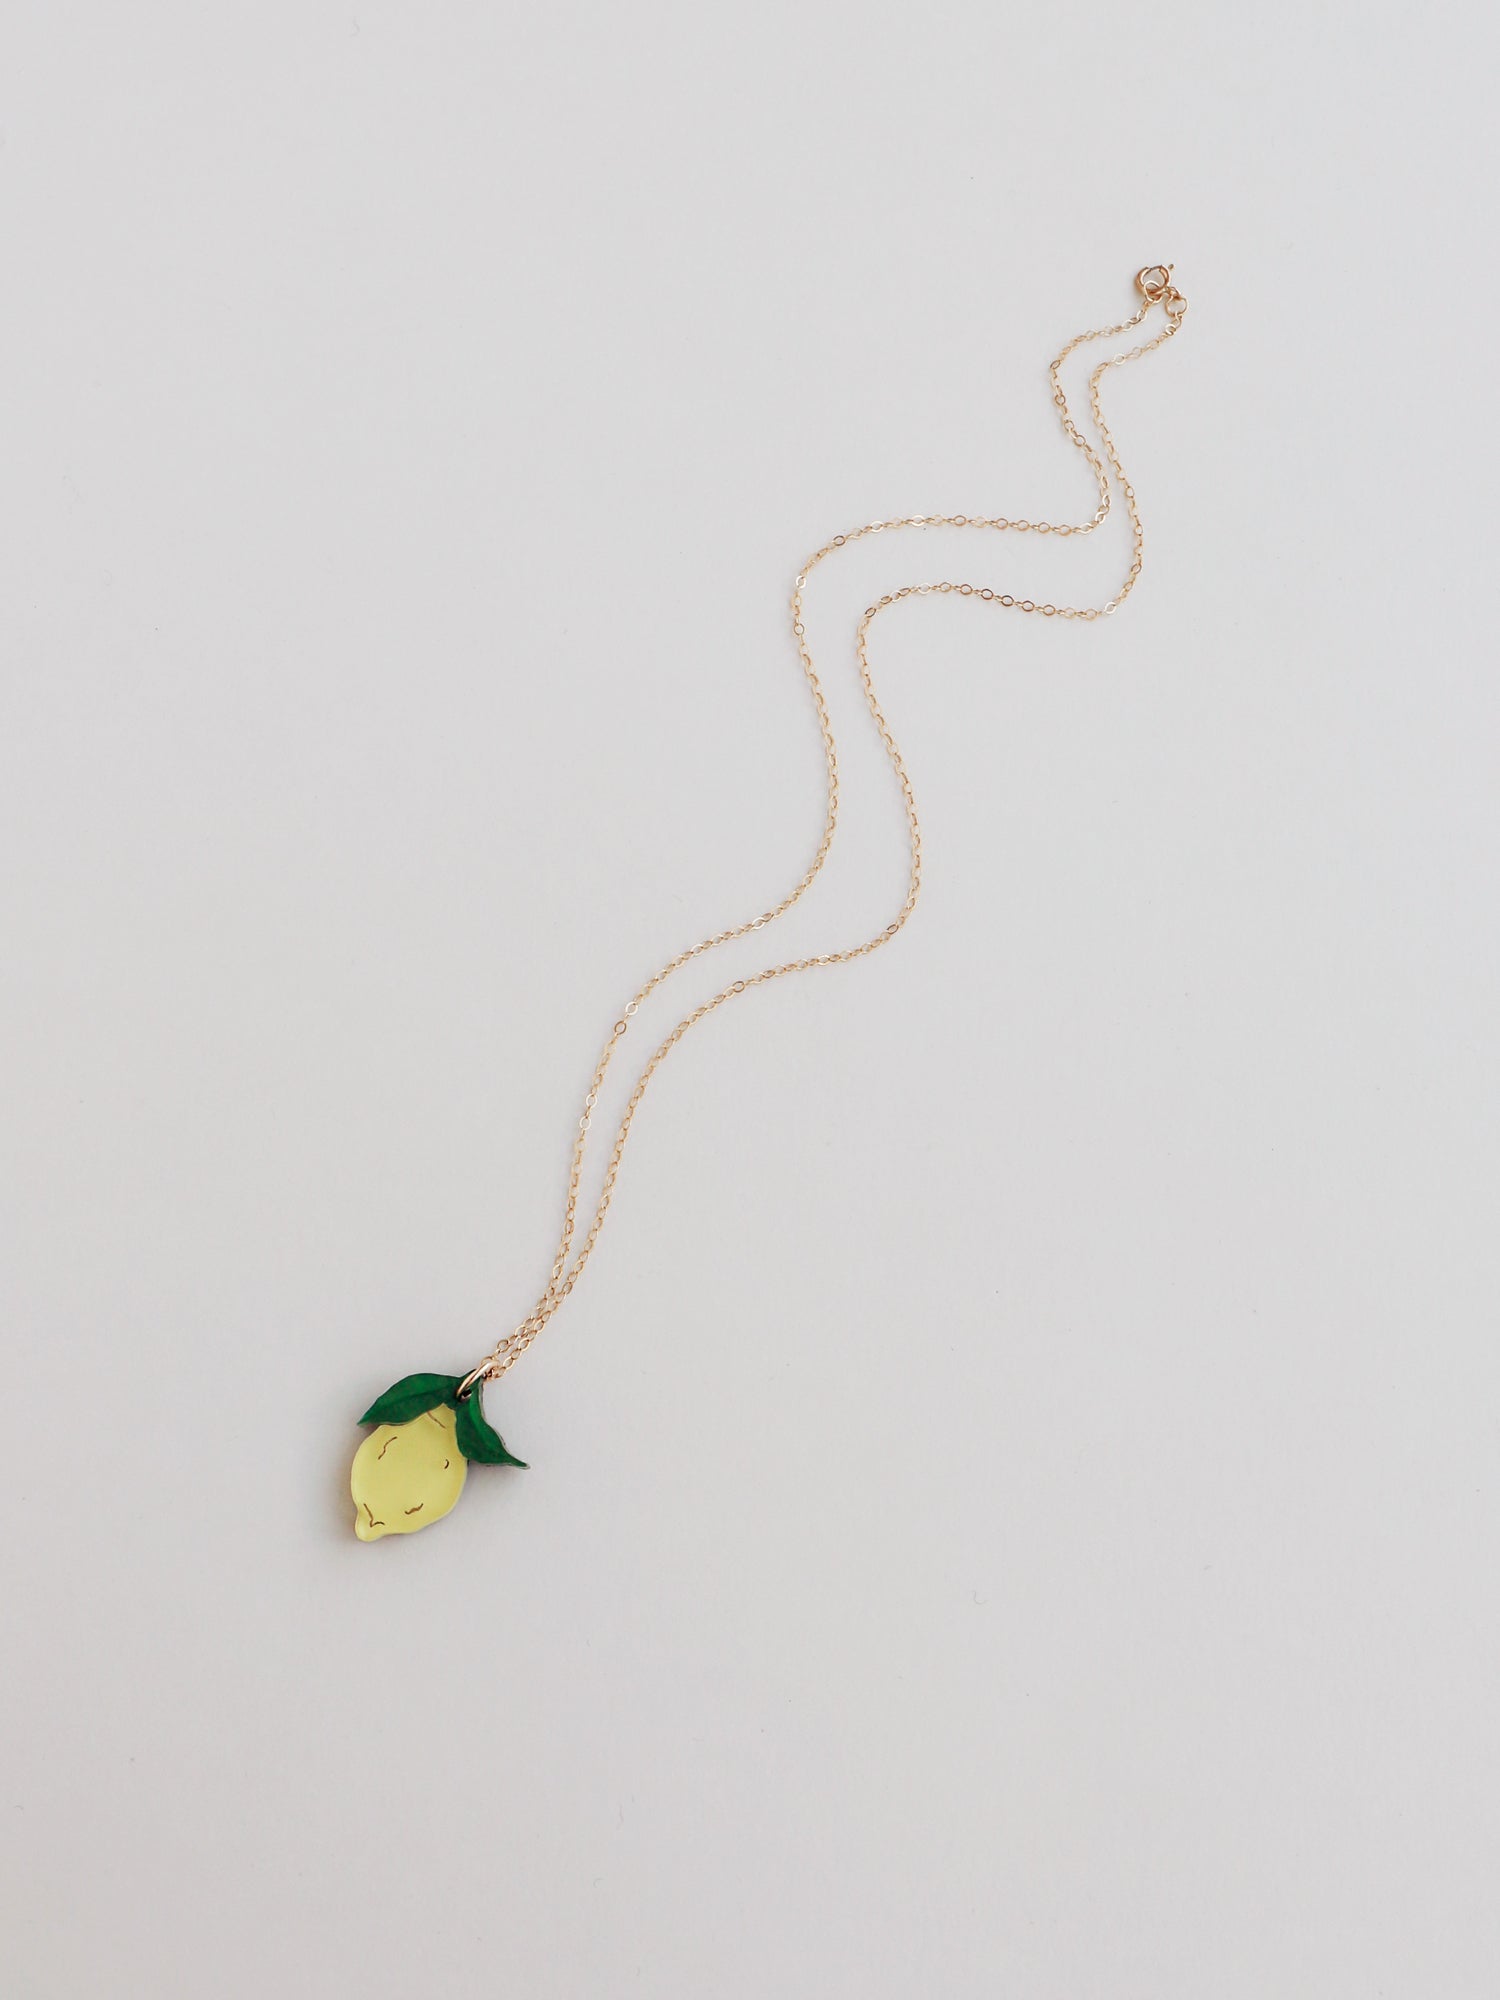 Lemon pendant necklace with green leaf made with wood, 64% recycled acrylic and hand-inked details. Hung on a high quality 45cm gold-filled chain. Handmade in the UK by Wolf & Moon.